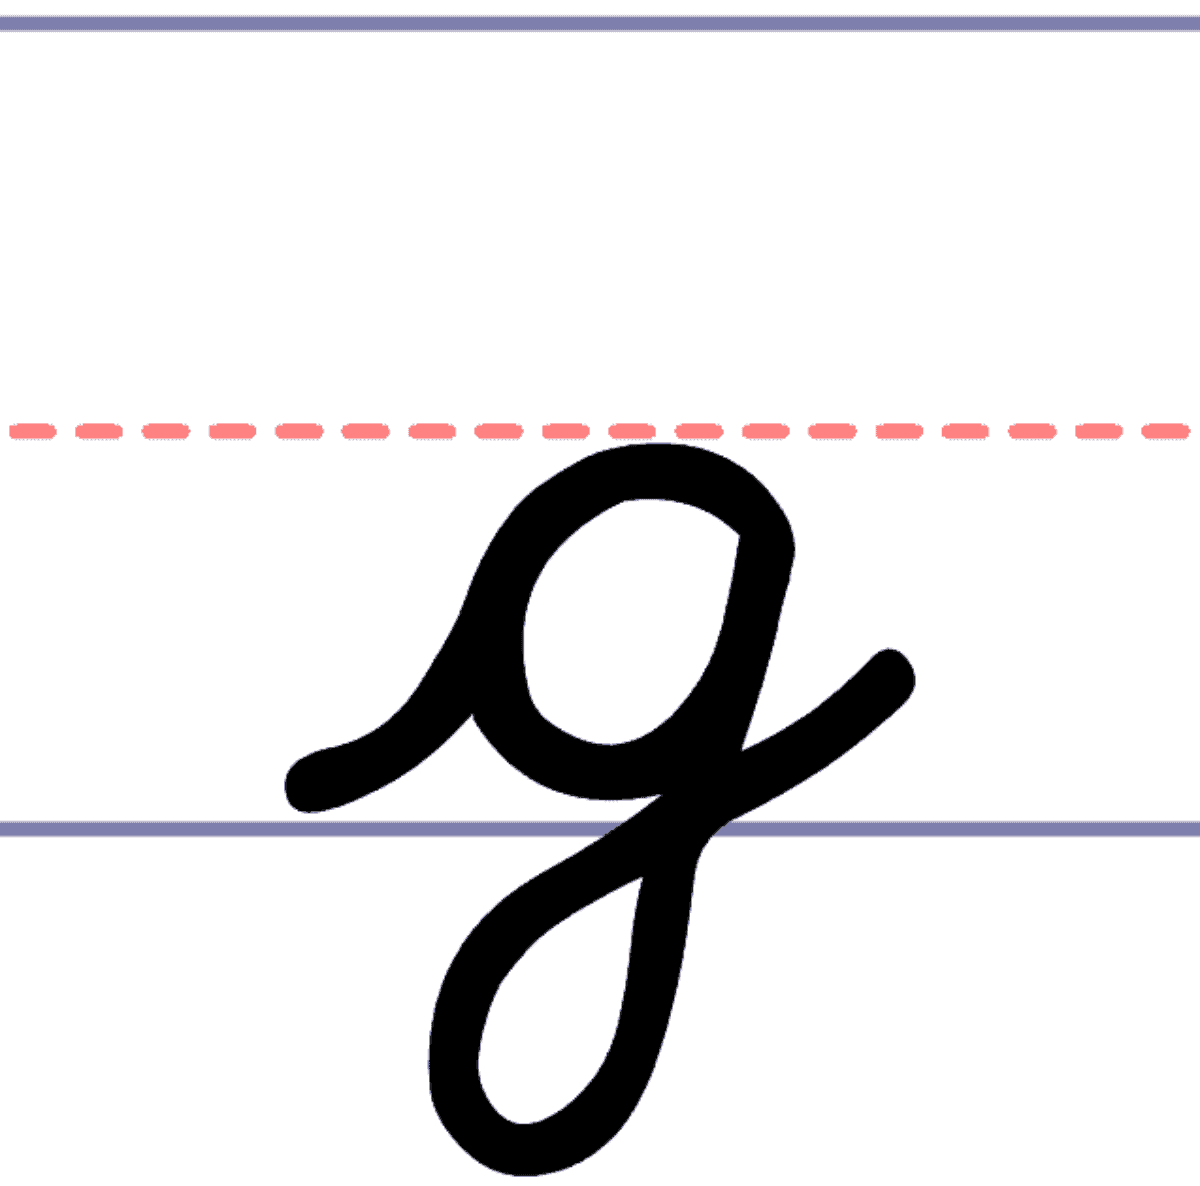 How to Write a Cursive Lowercase g